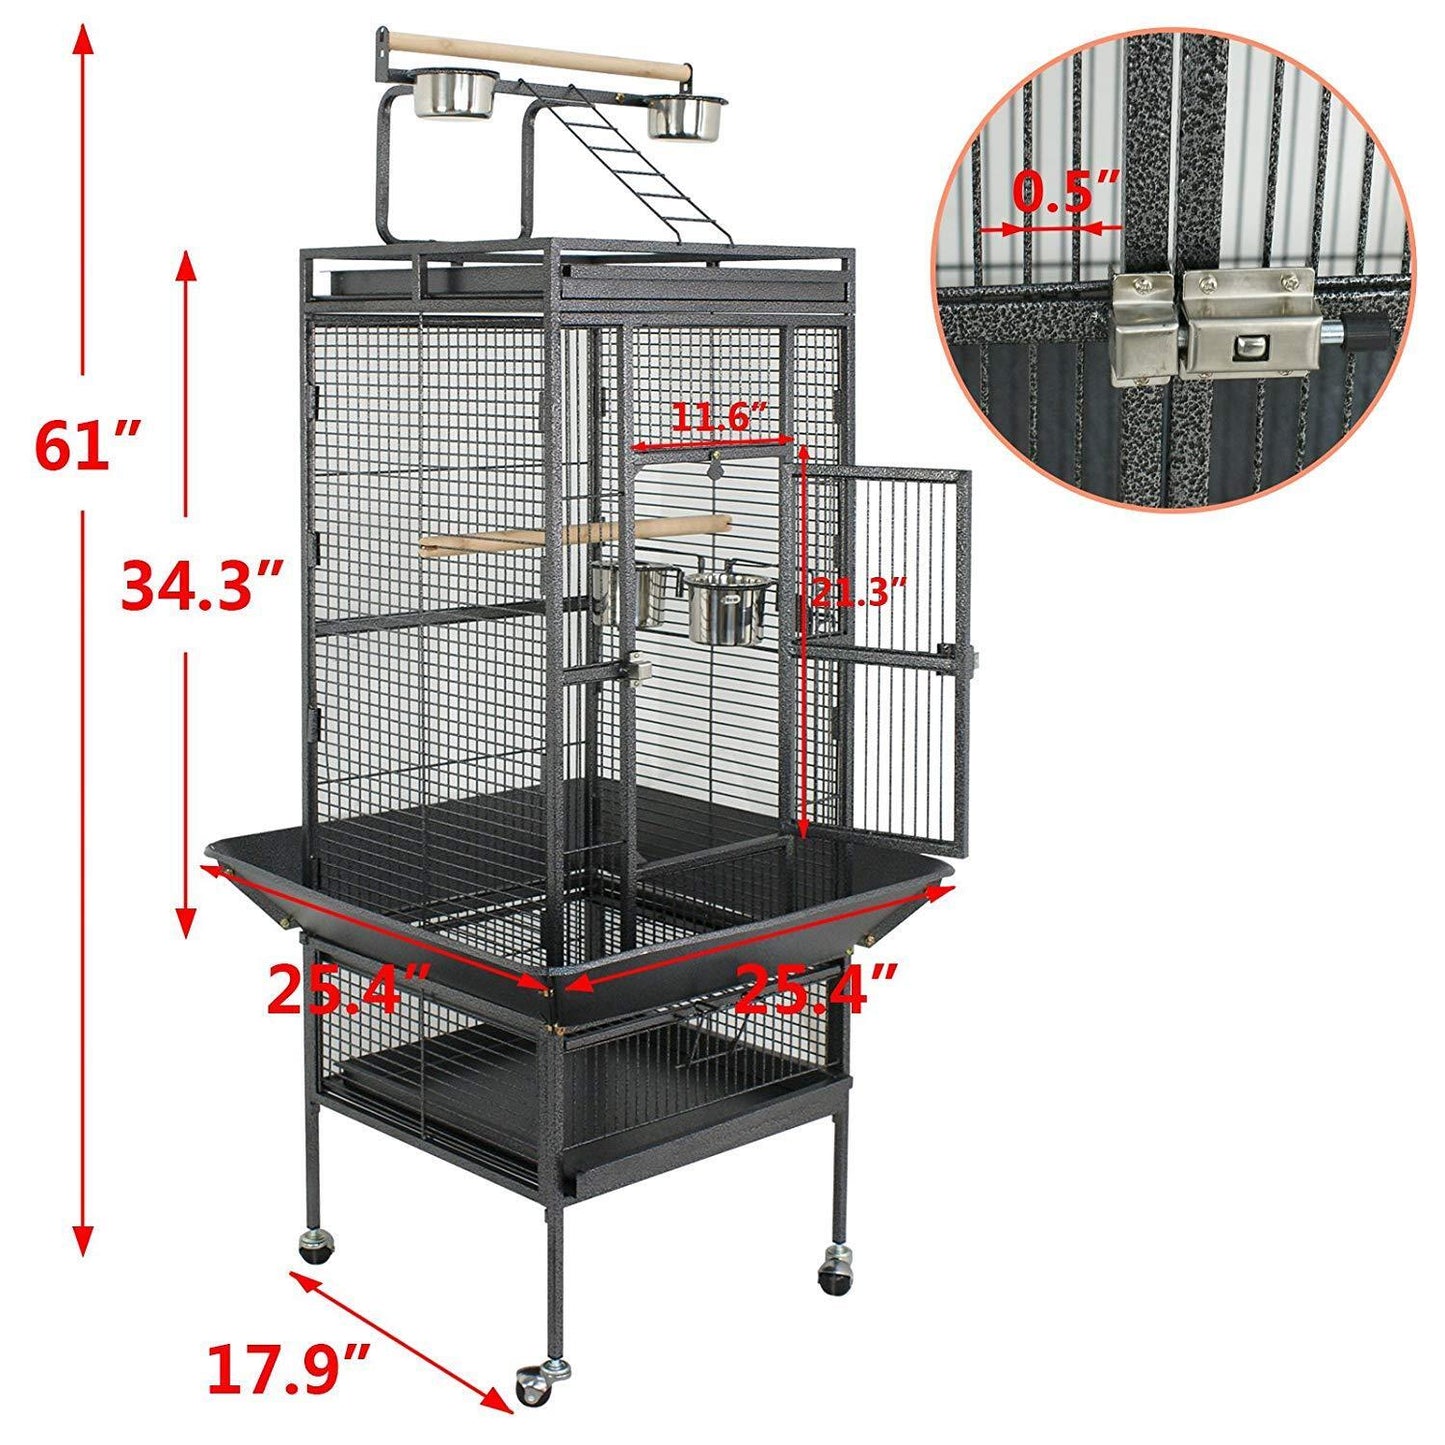 61" Bird Parrot Cage Cockatiel Finch Pet Parakeet Stand Top Supply House Large